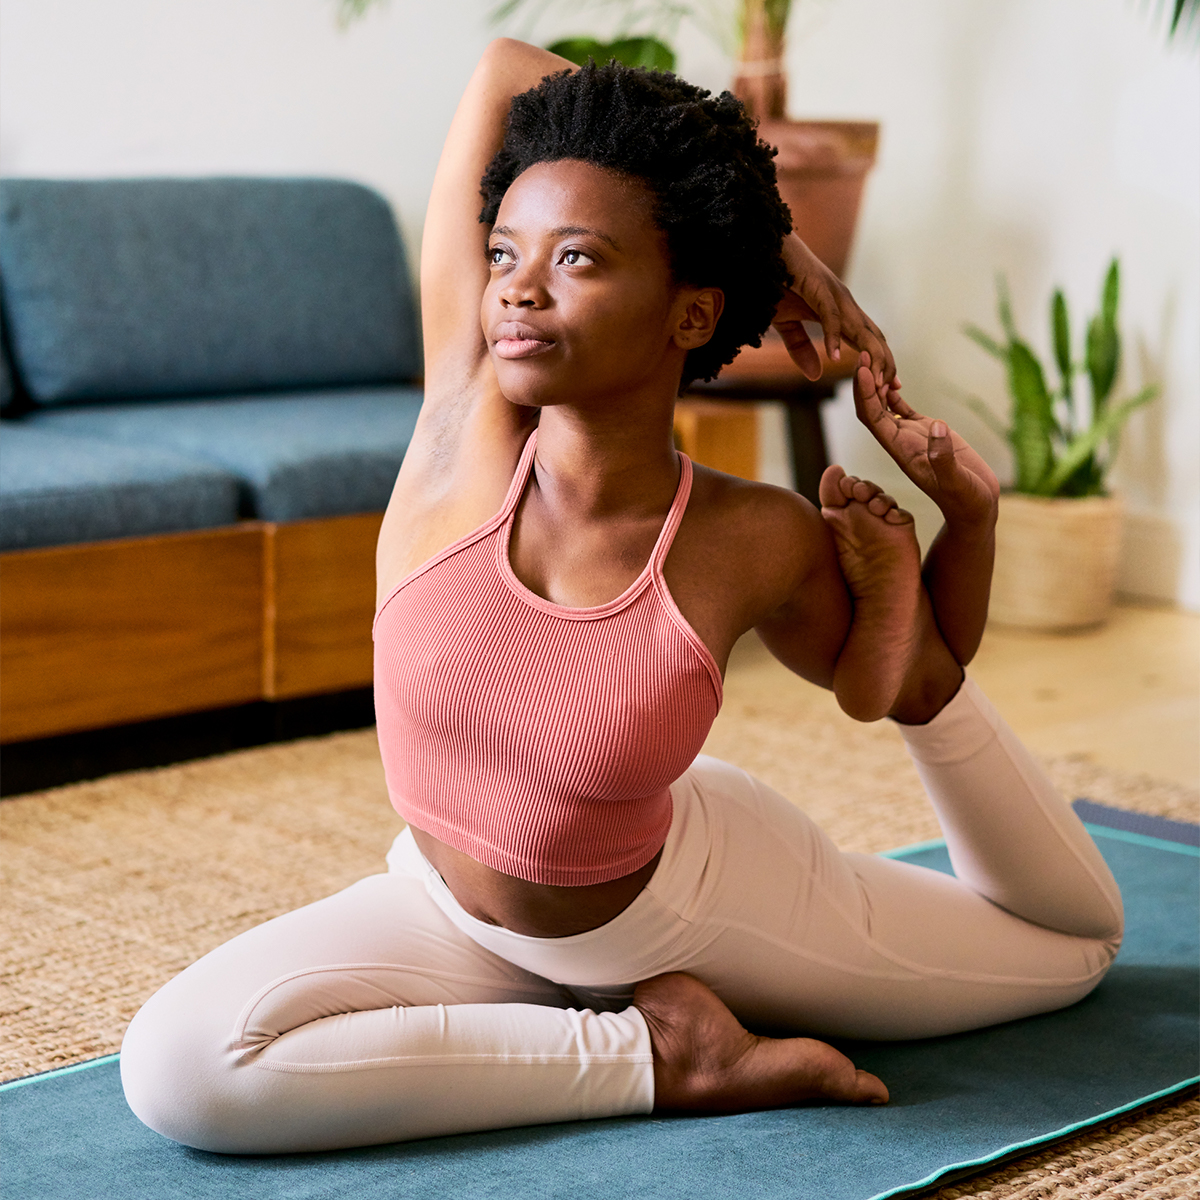 Yoga Vs. Pilates – Trainers Compare The Workouts And Benefits